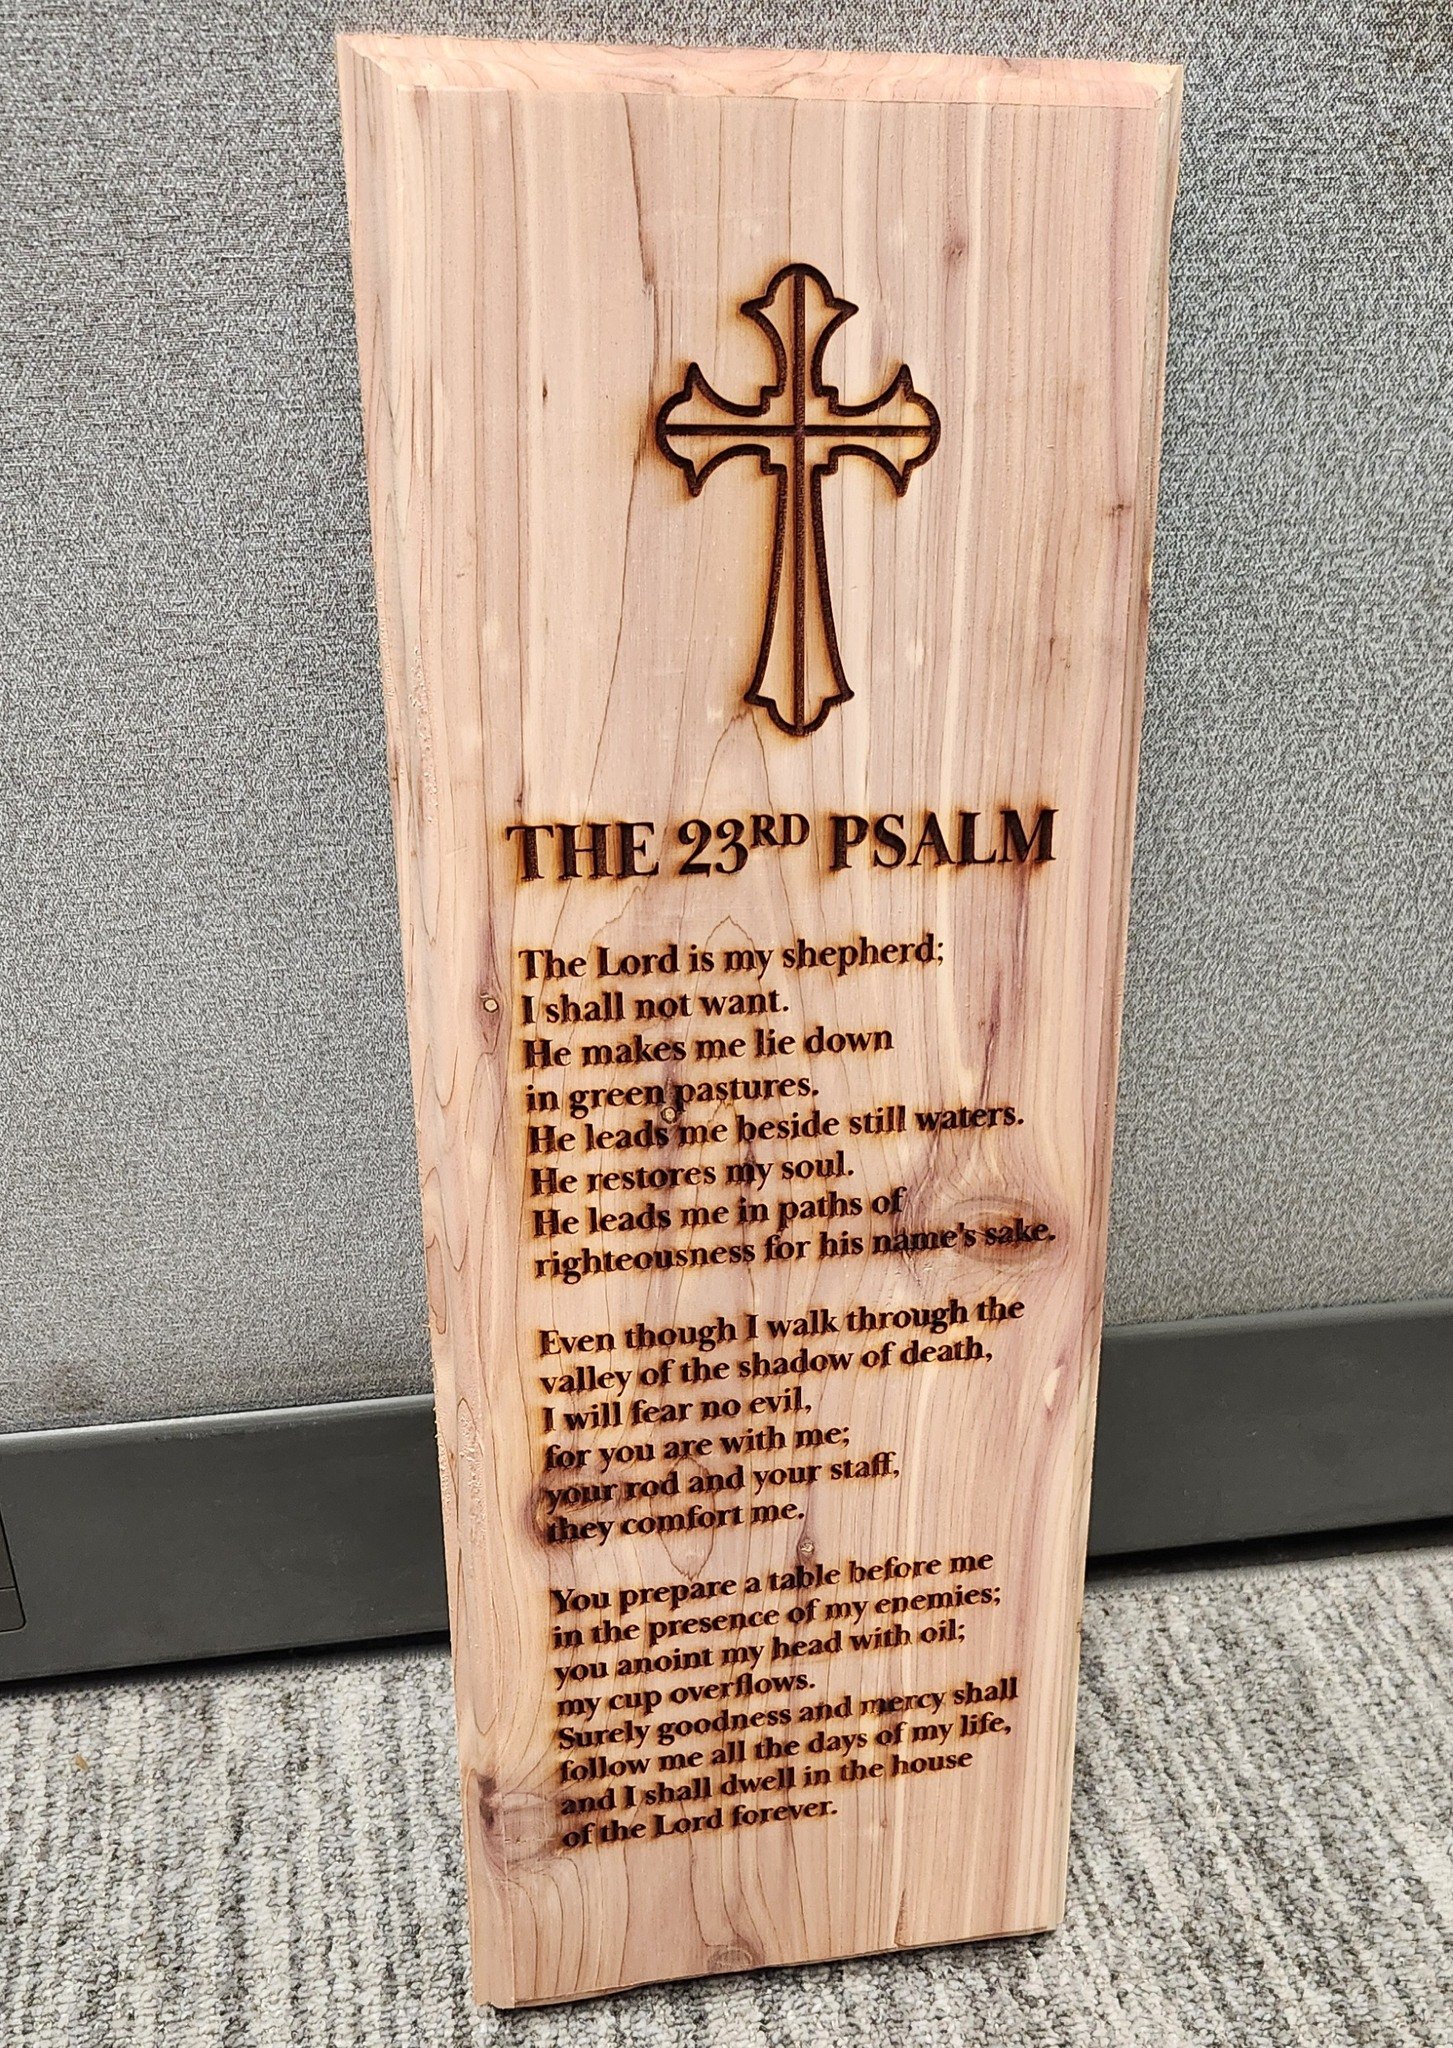 Some custom engraved cedar wood projects for a local customer. We have a variety of woods to choose from or you can even provide your own. You tell us your idea, we will make it happen. #zalaznikcreative #dubuque